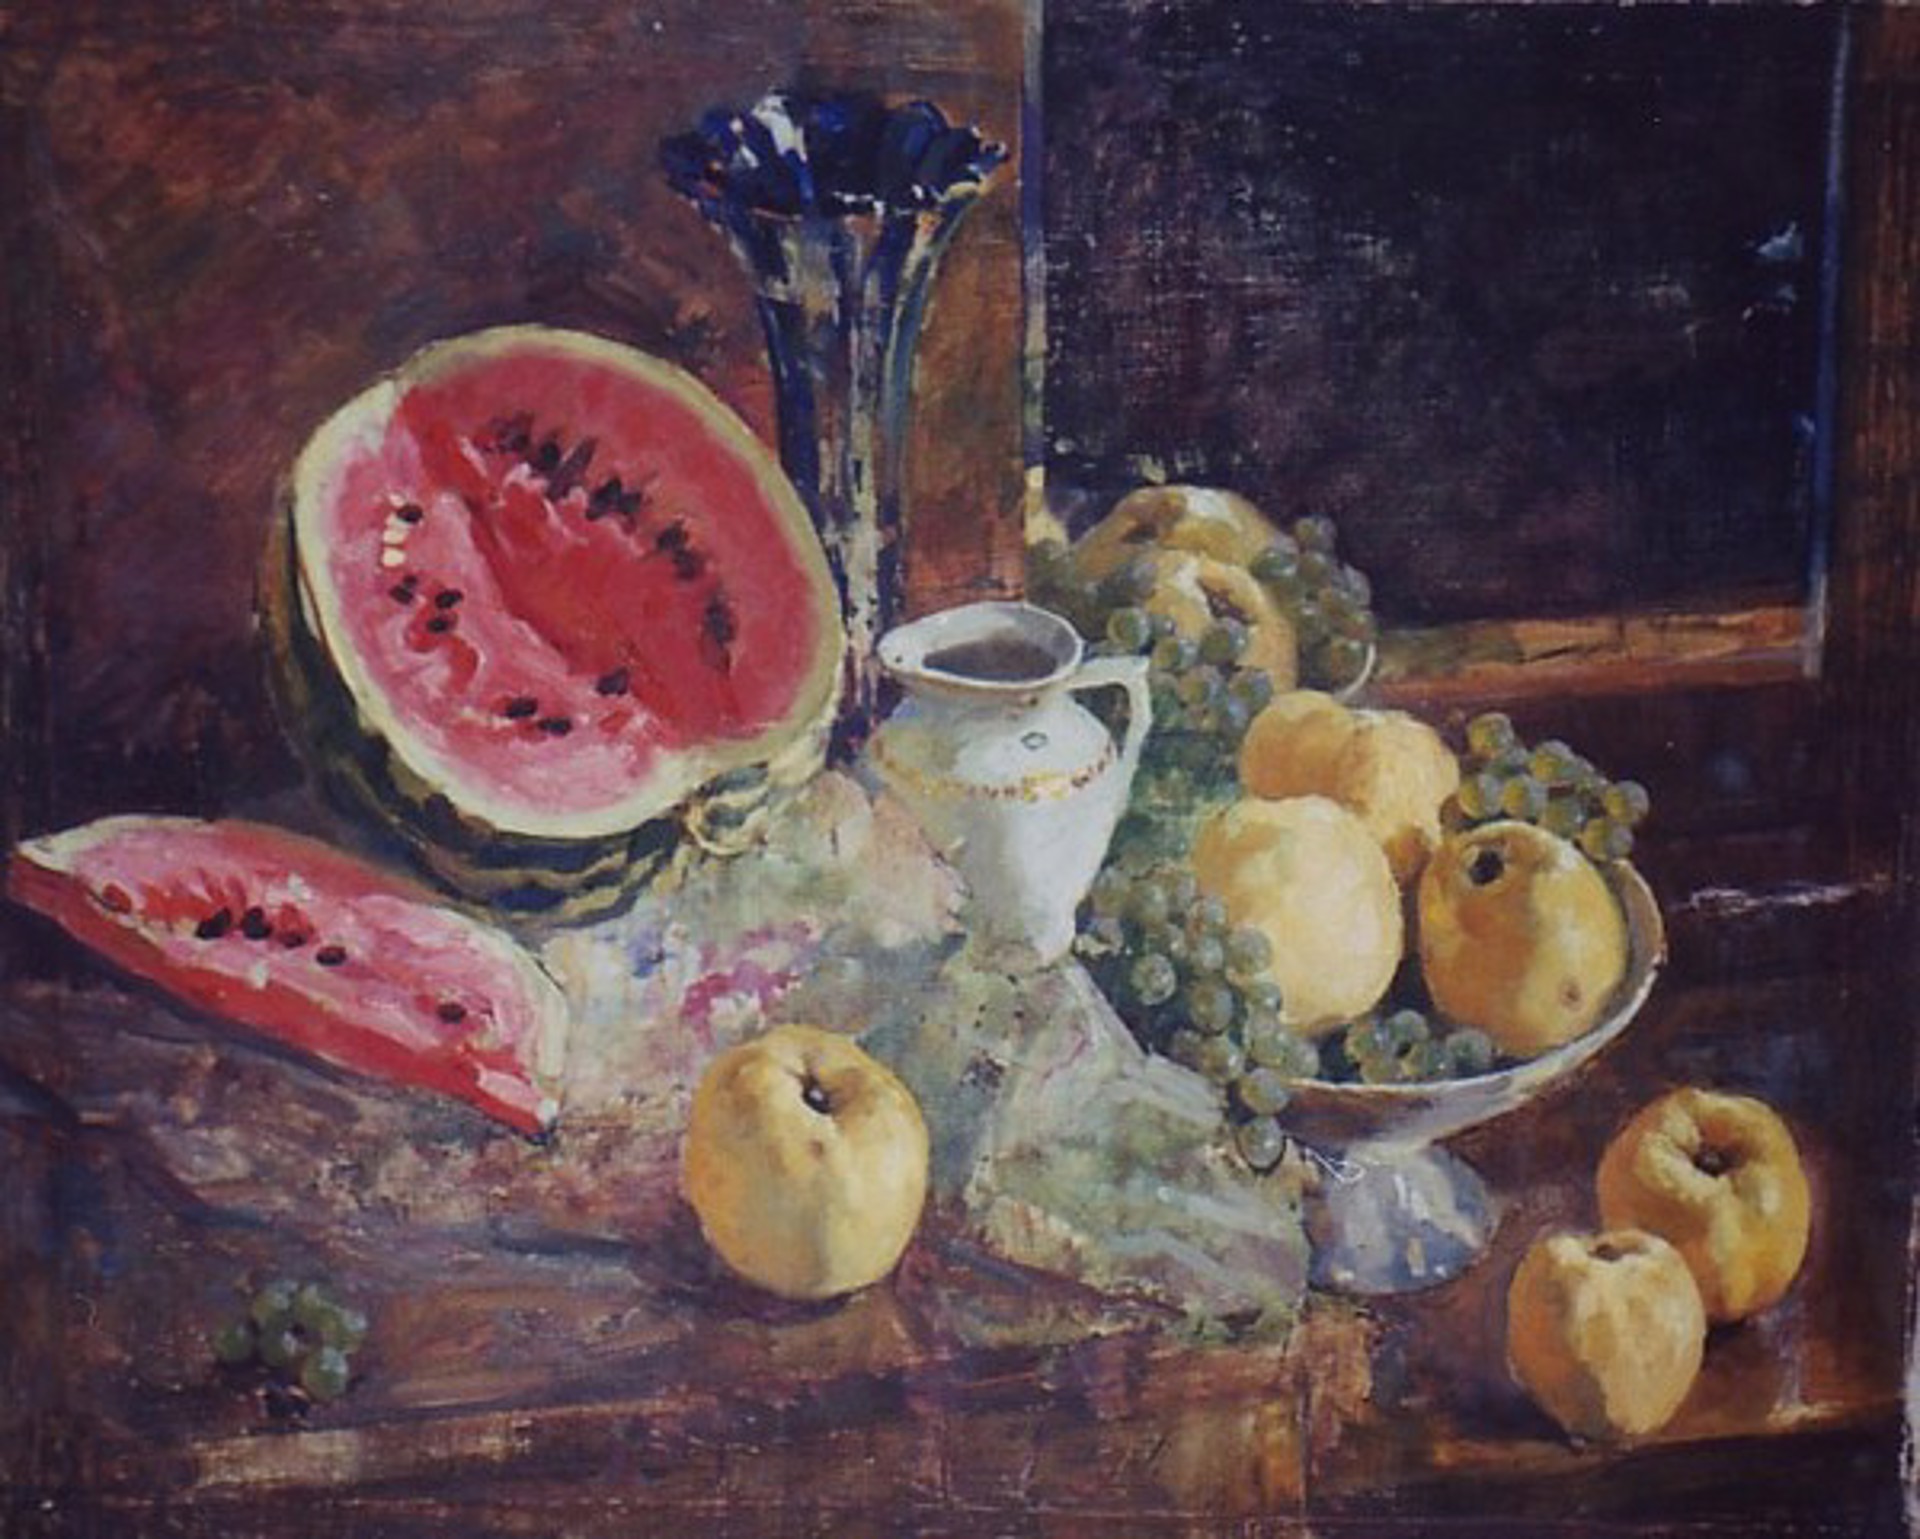 Watermelon and Apples by Mikhail Antonchik